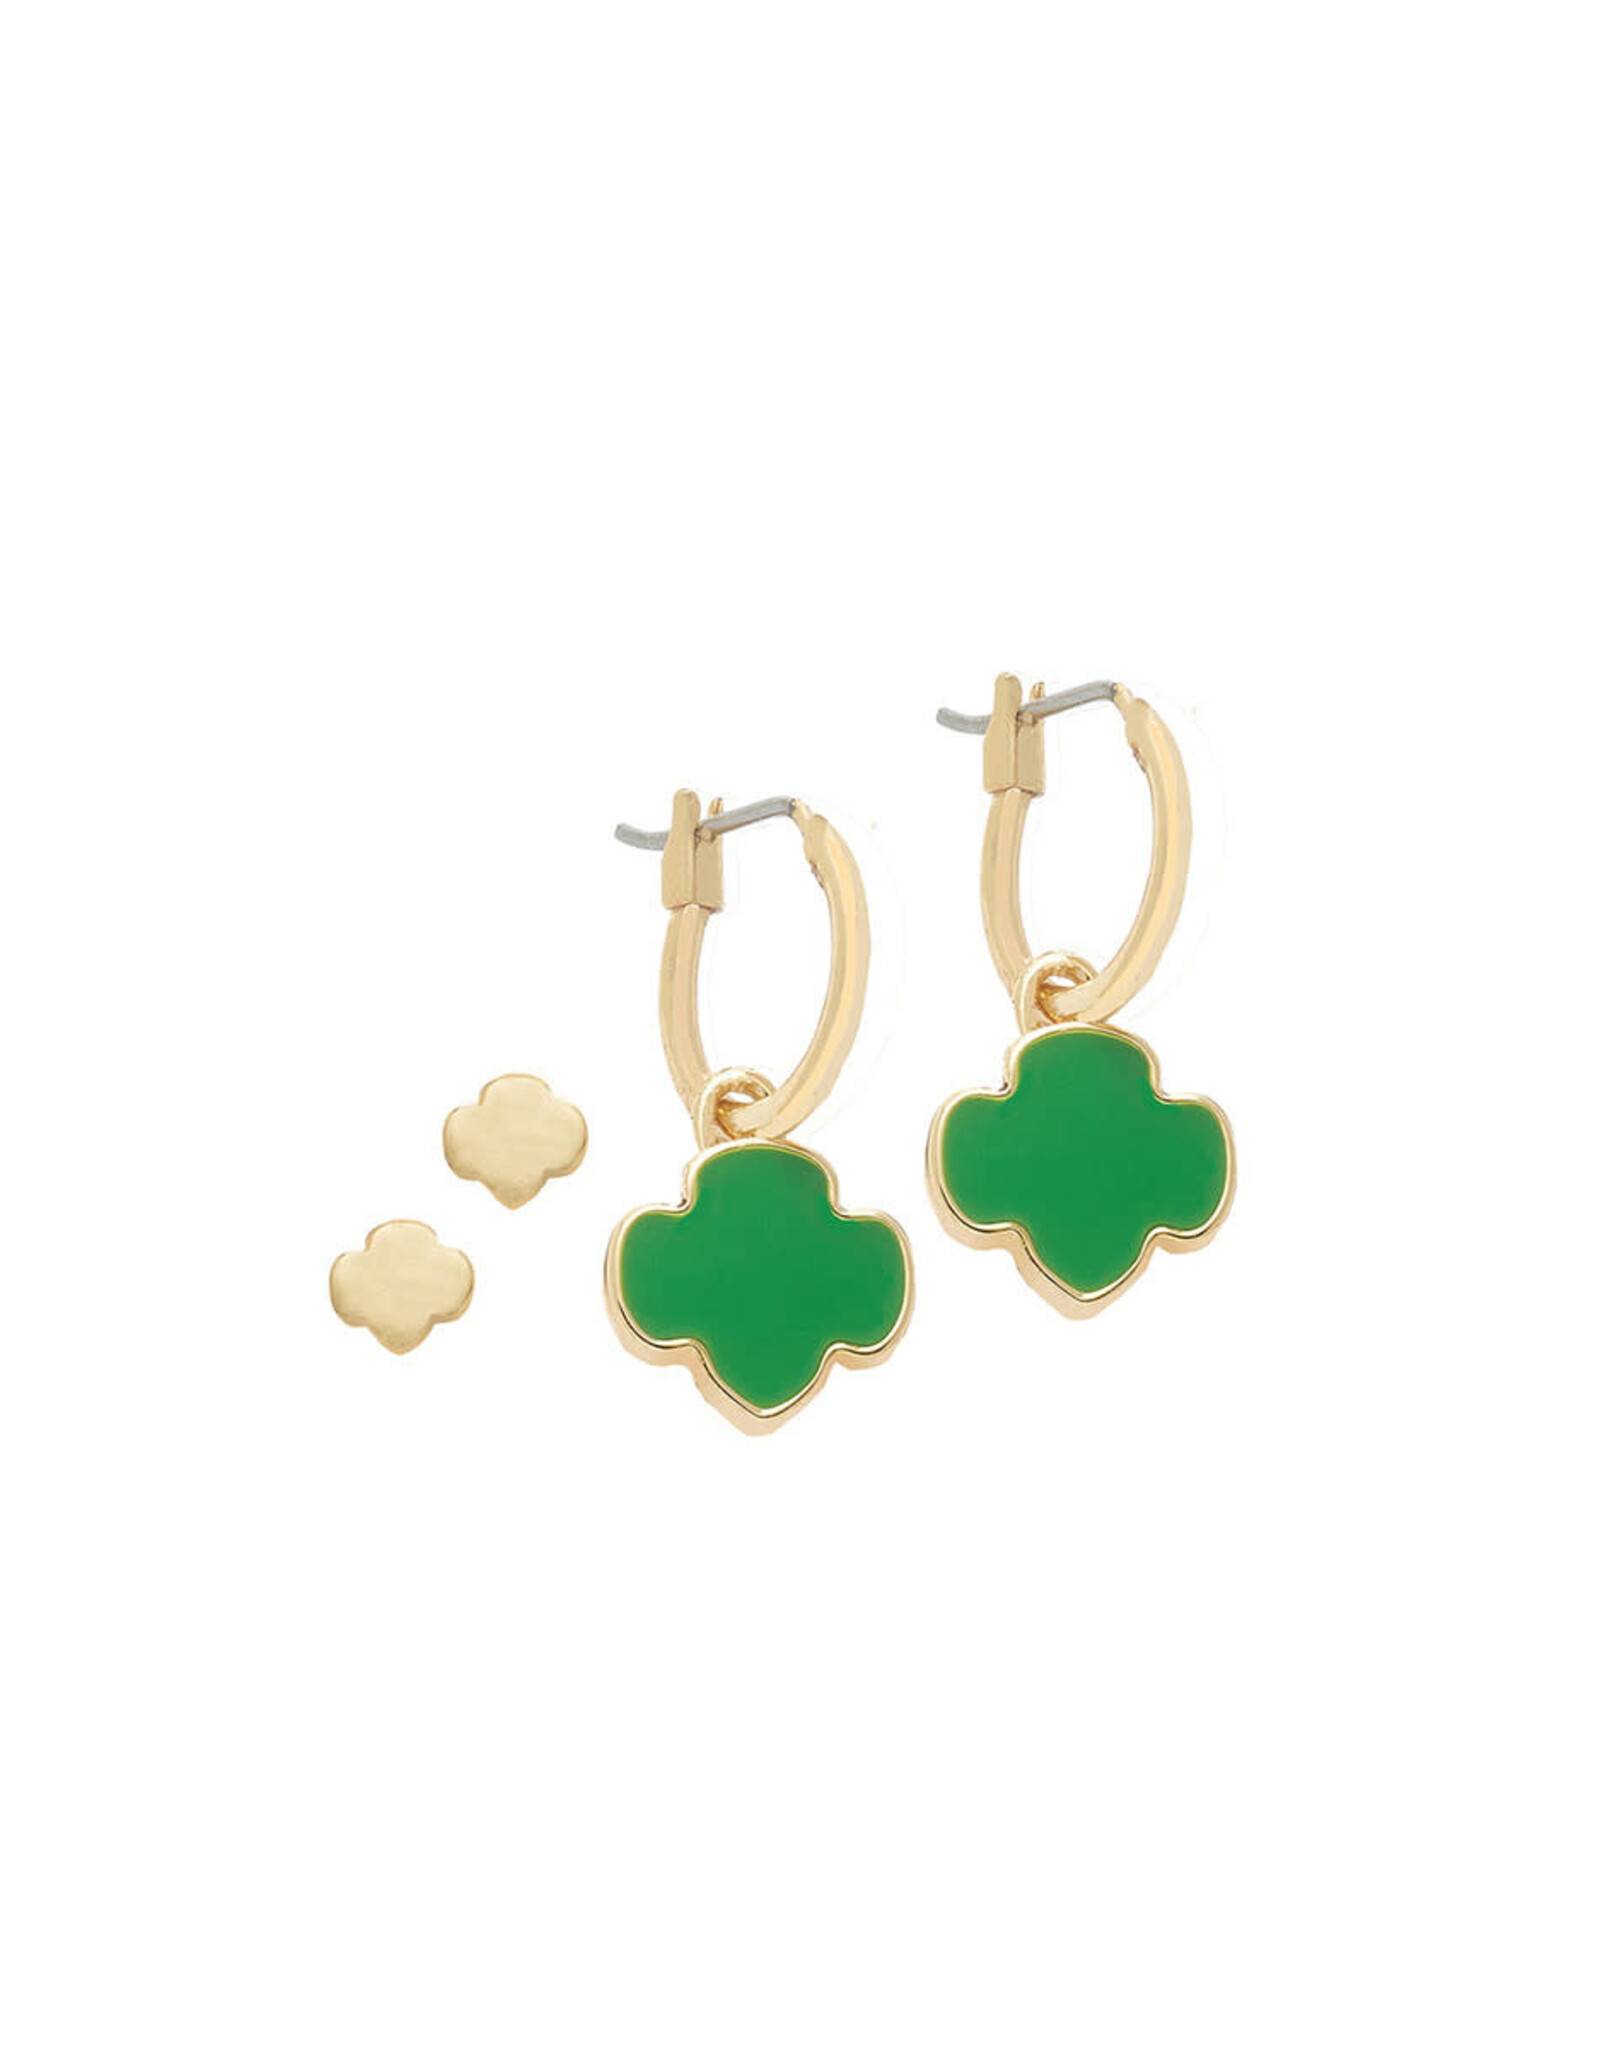 Charming Jewelry Girl Scout Goldtone Earring Set